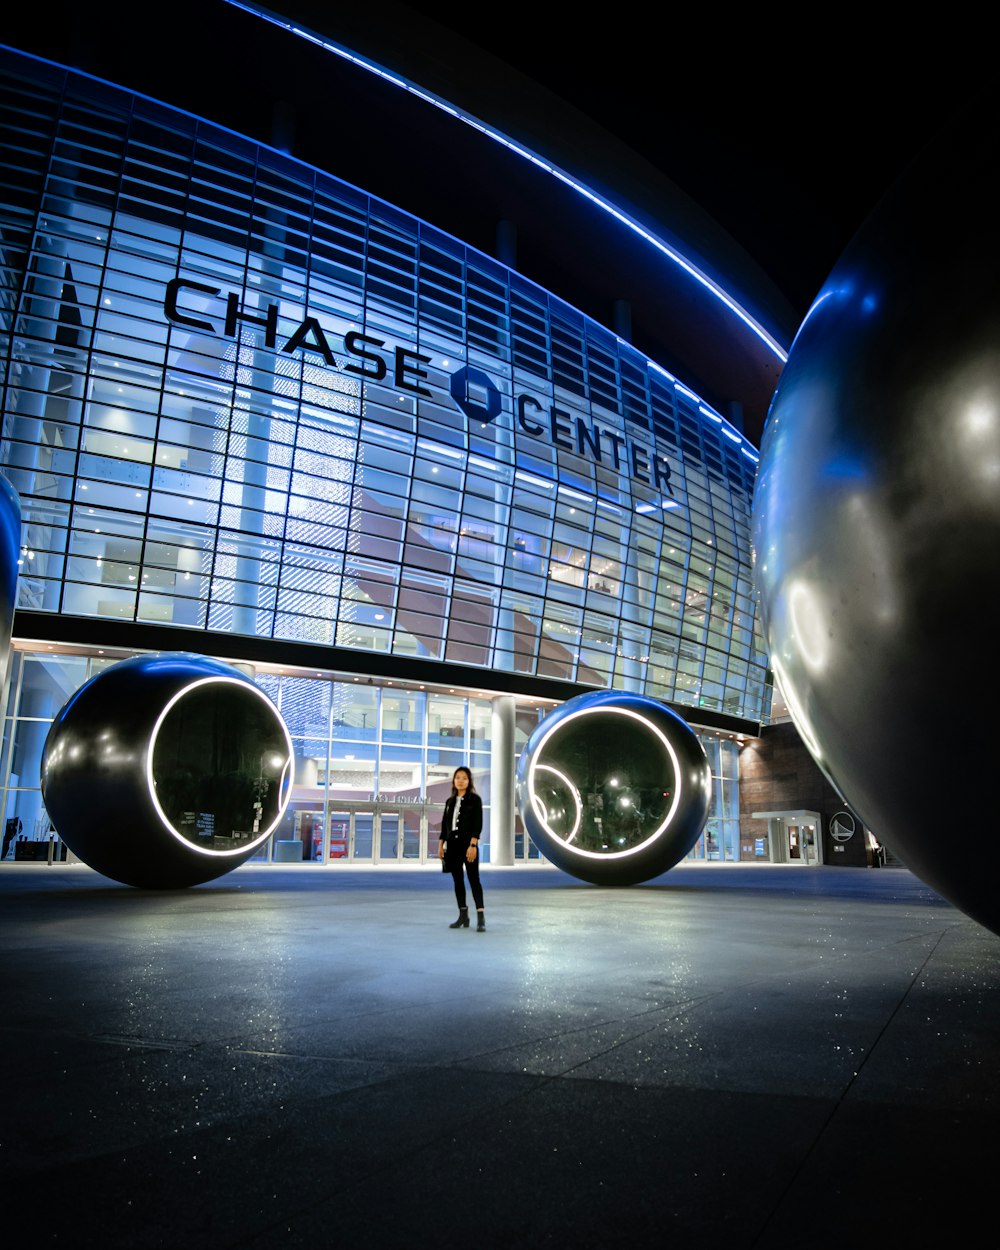 Chase Center building